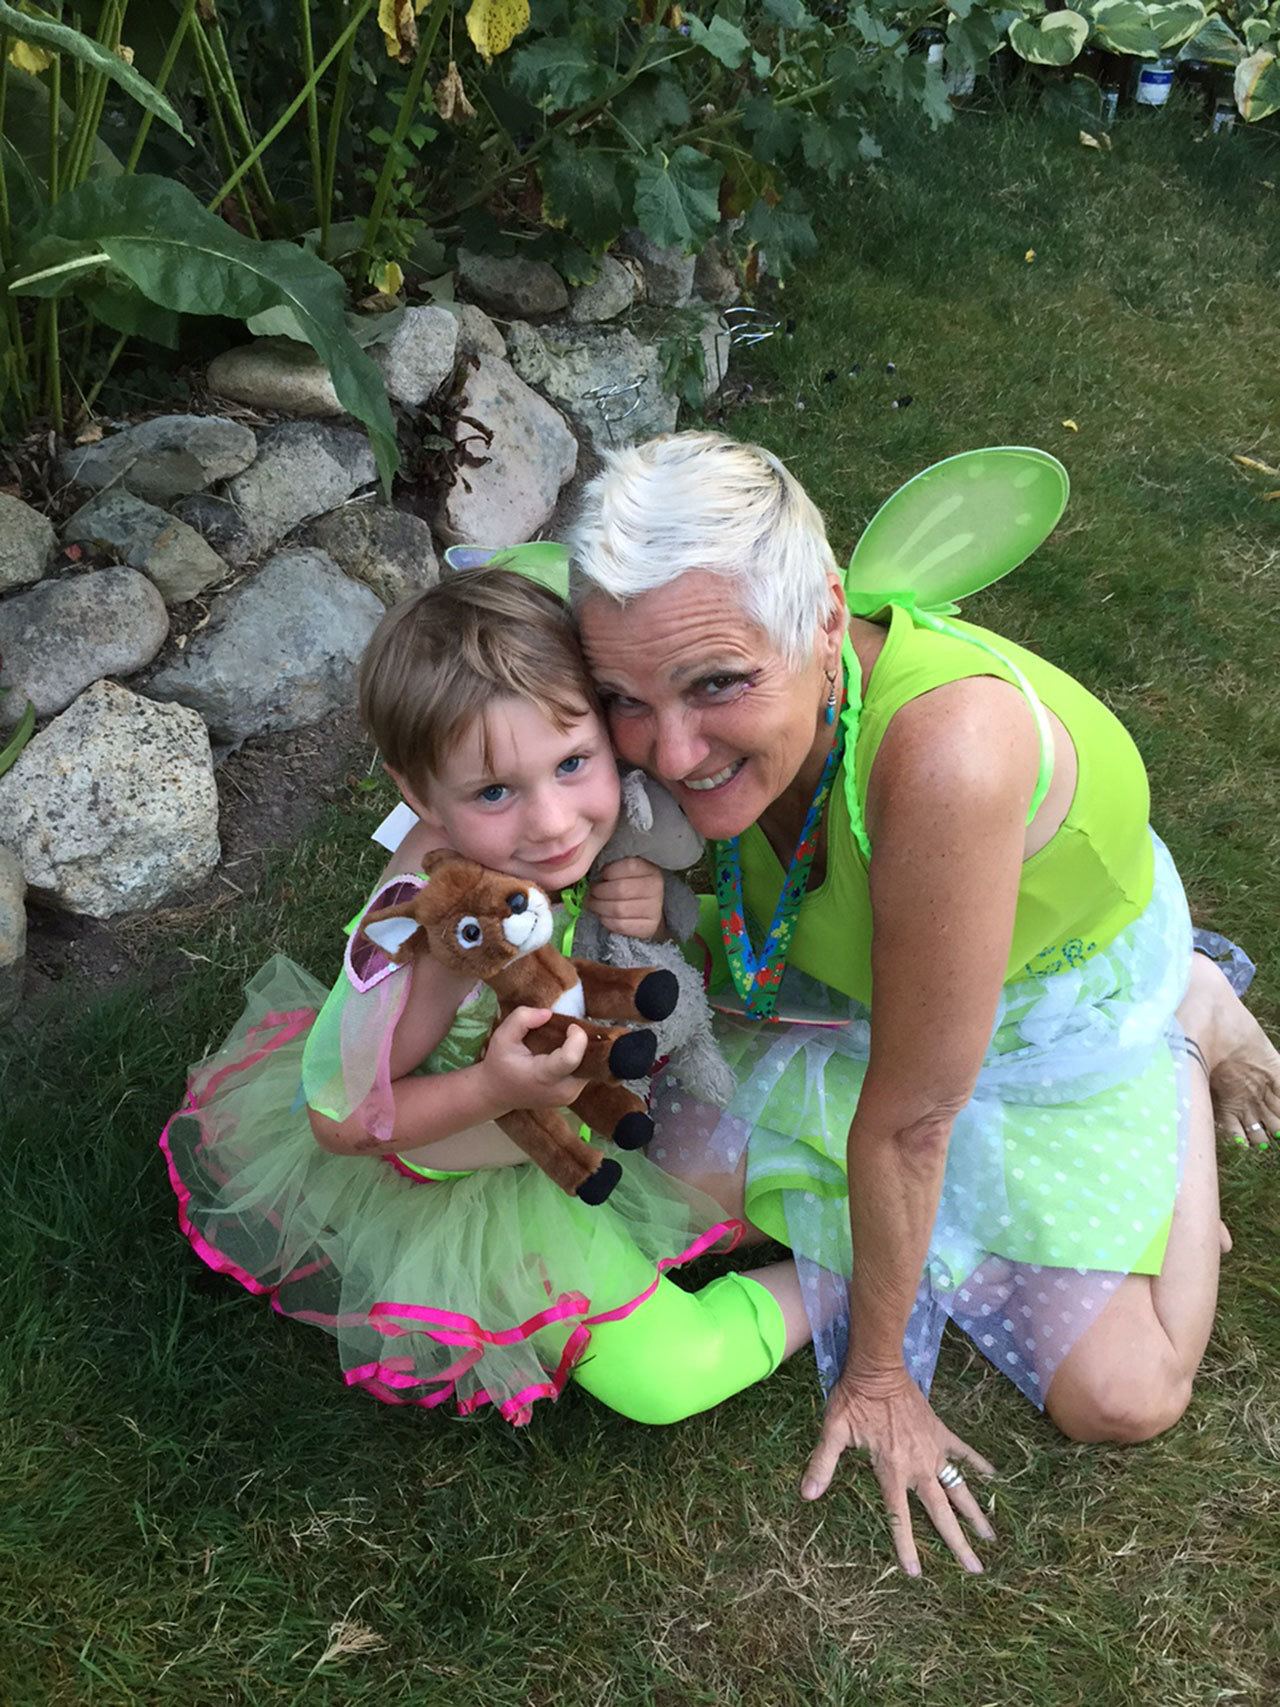 Colleen Carette as Tinker Bell at Camp Goodtimes. (Courtesy Photo)